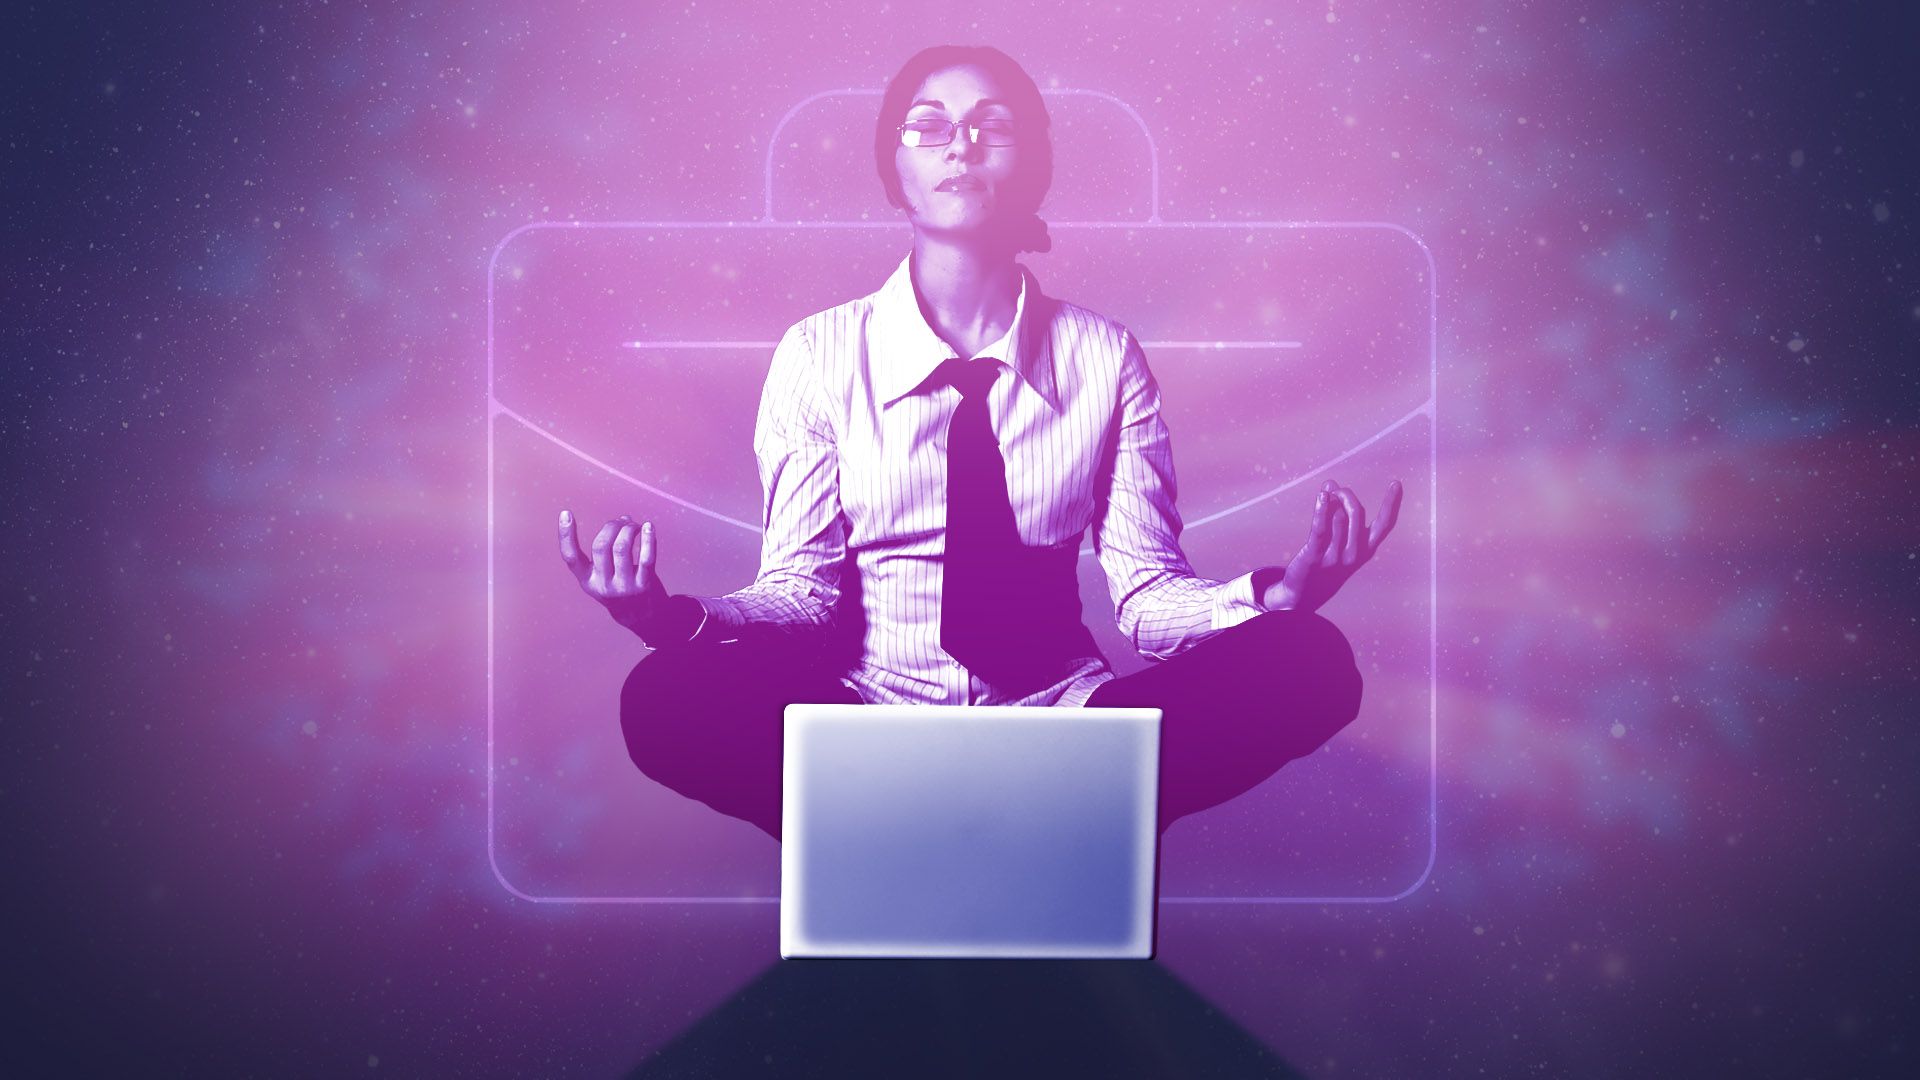 lIllustration of a meditating worker in front of a laptop with a glowing briefcase and abstract space behind her